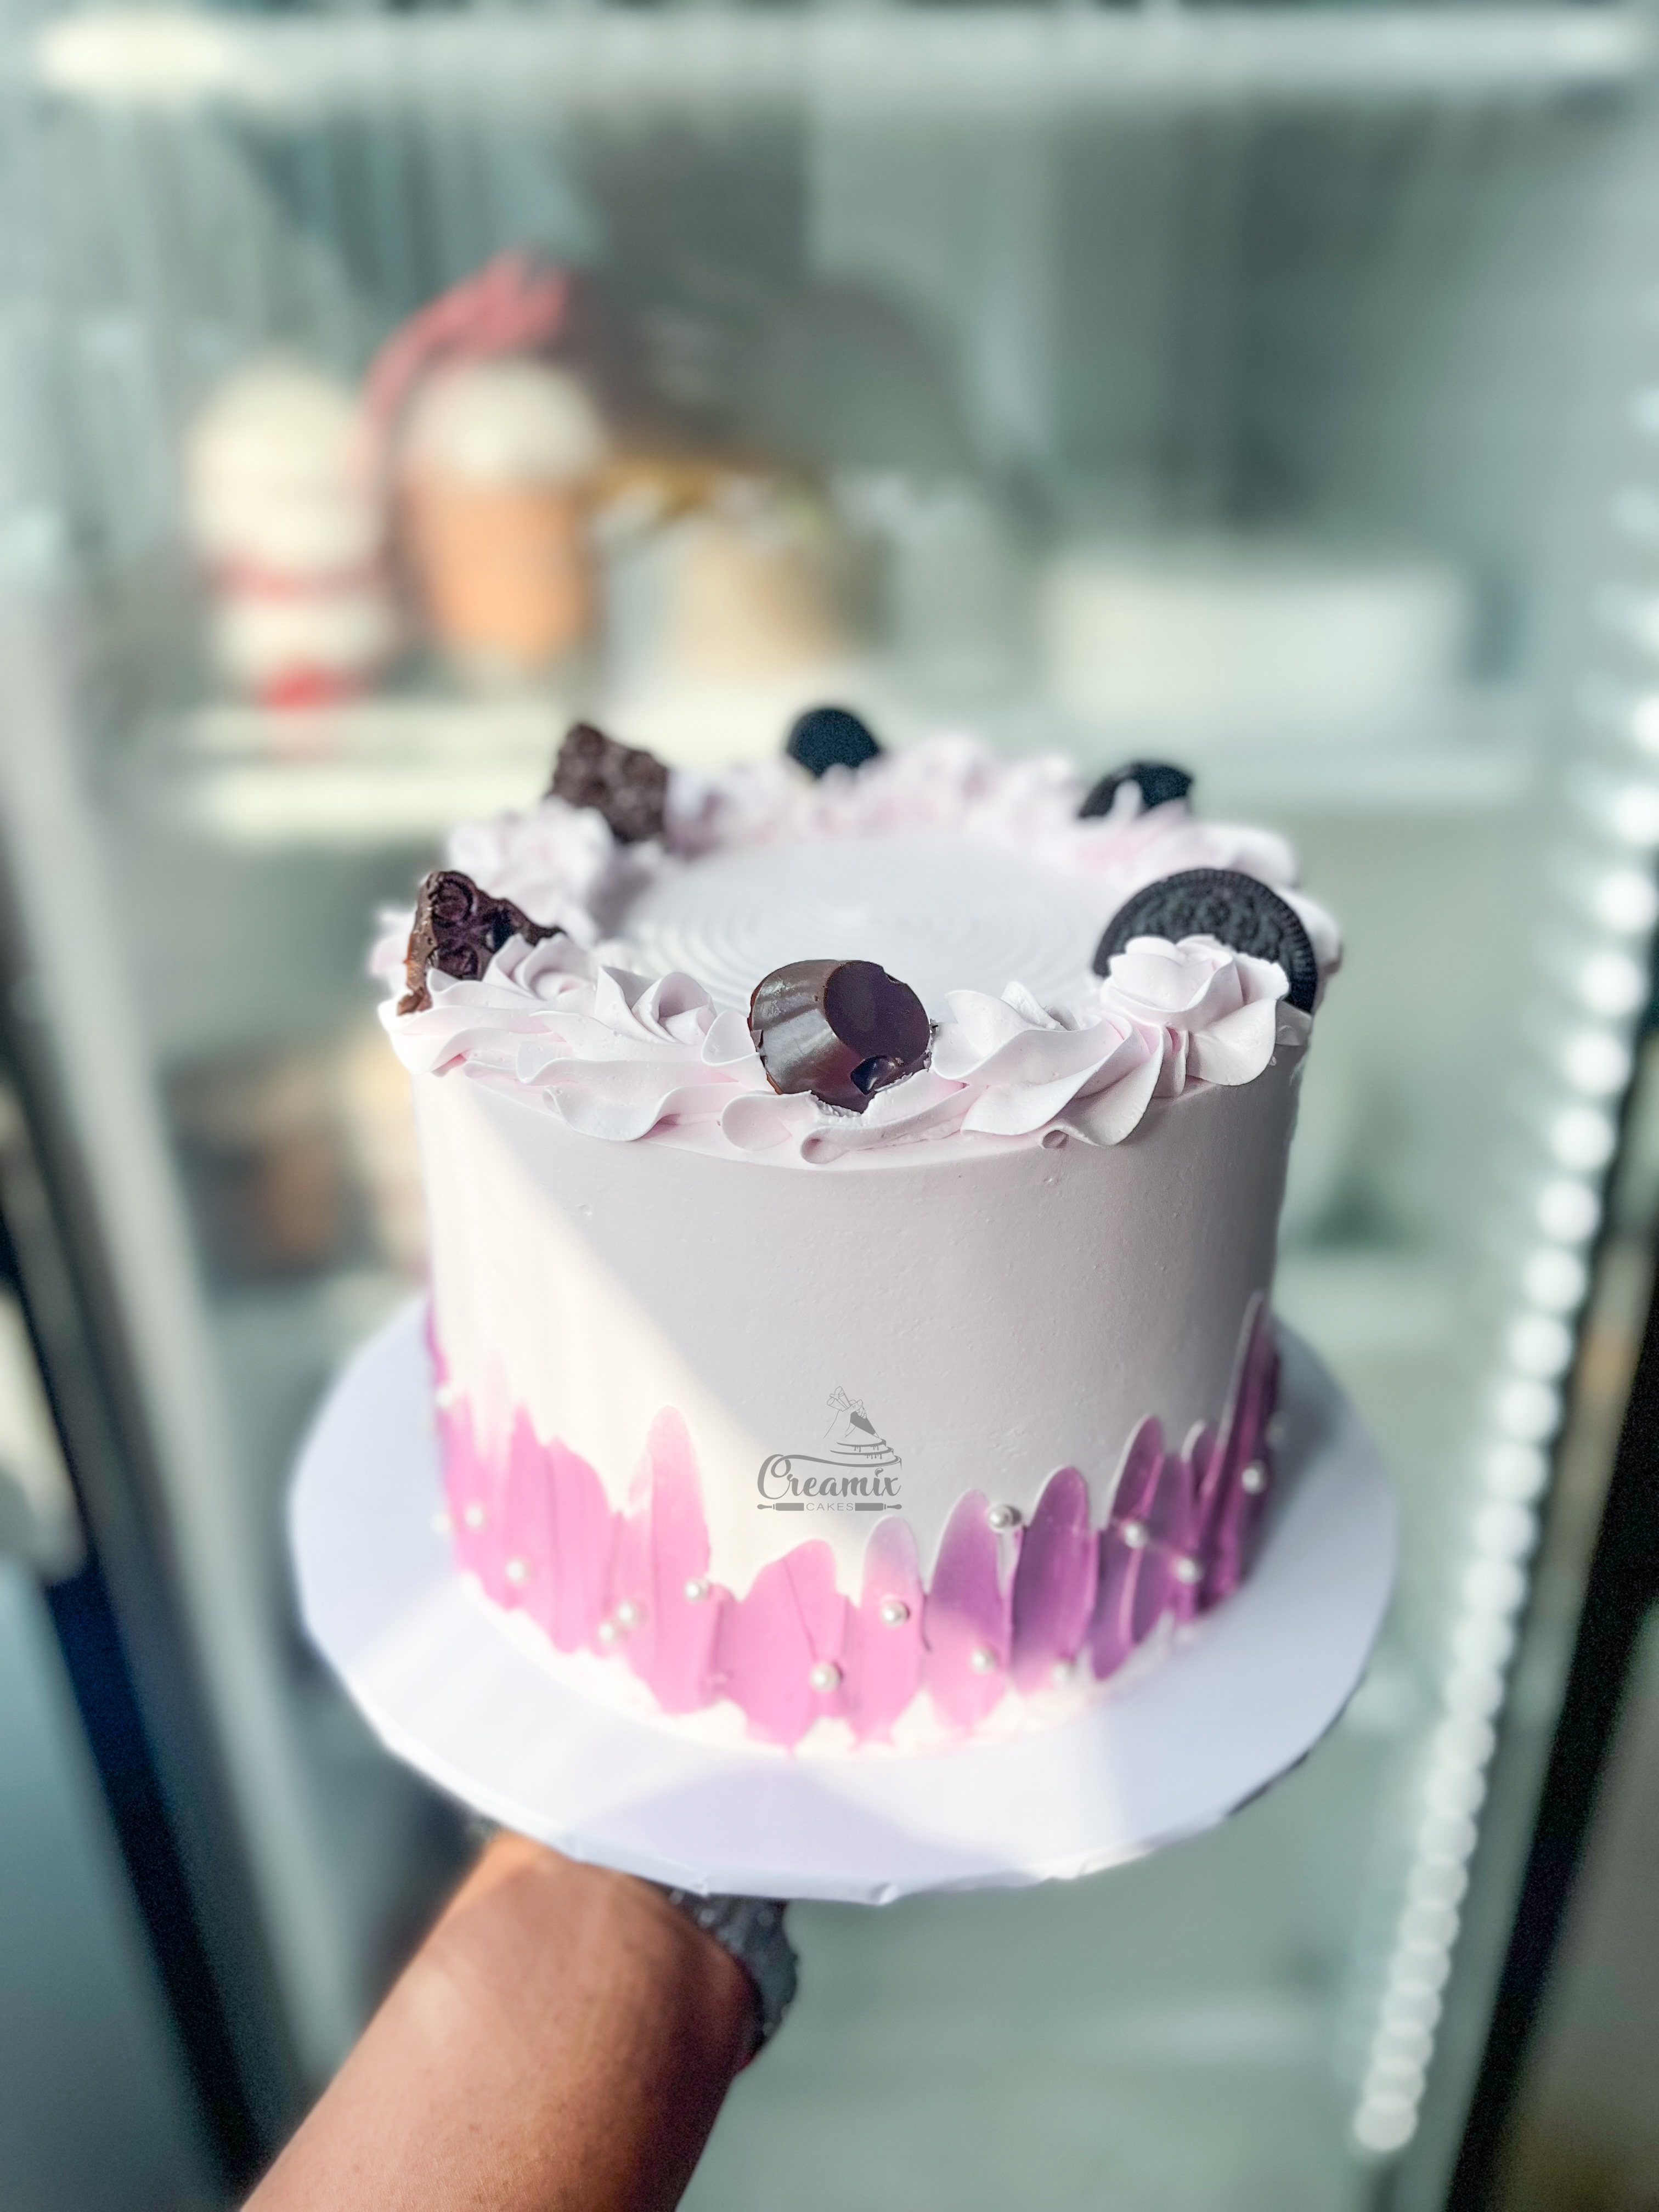 7 inch 2 layers white & grey - Available in Vanilla, Red Velvet, Chocolate, etc.